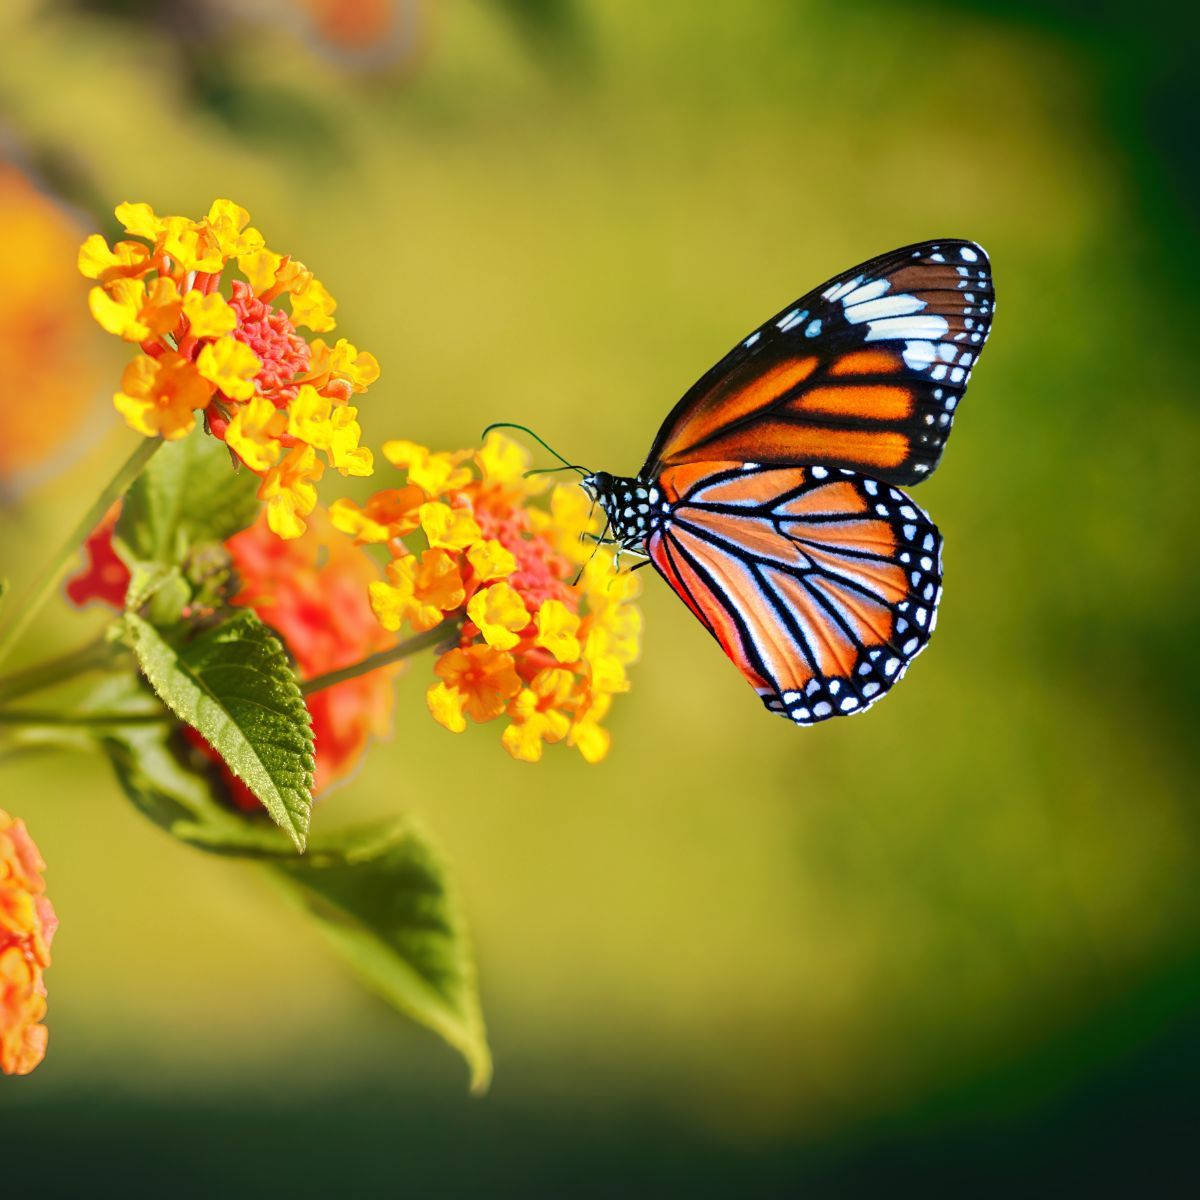 orange butterfly spiritual meaning